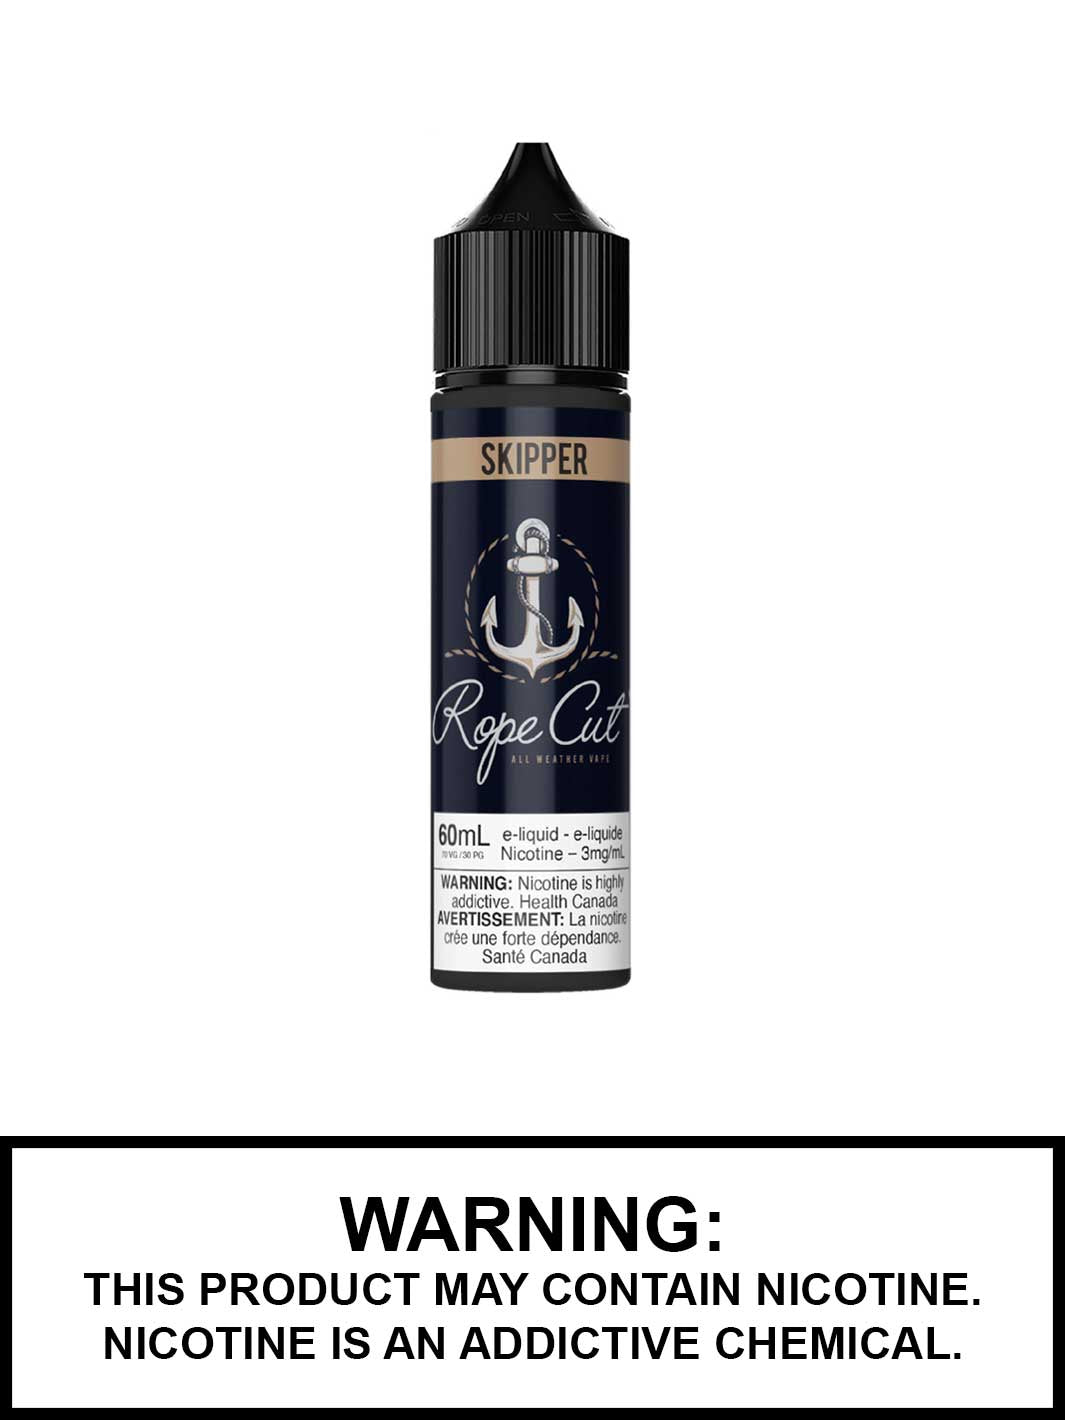 Skipper eJuice by Rope Cut Vape Juice, Tobacco eJuice in Canada, Vape360